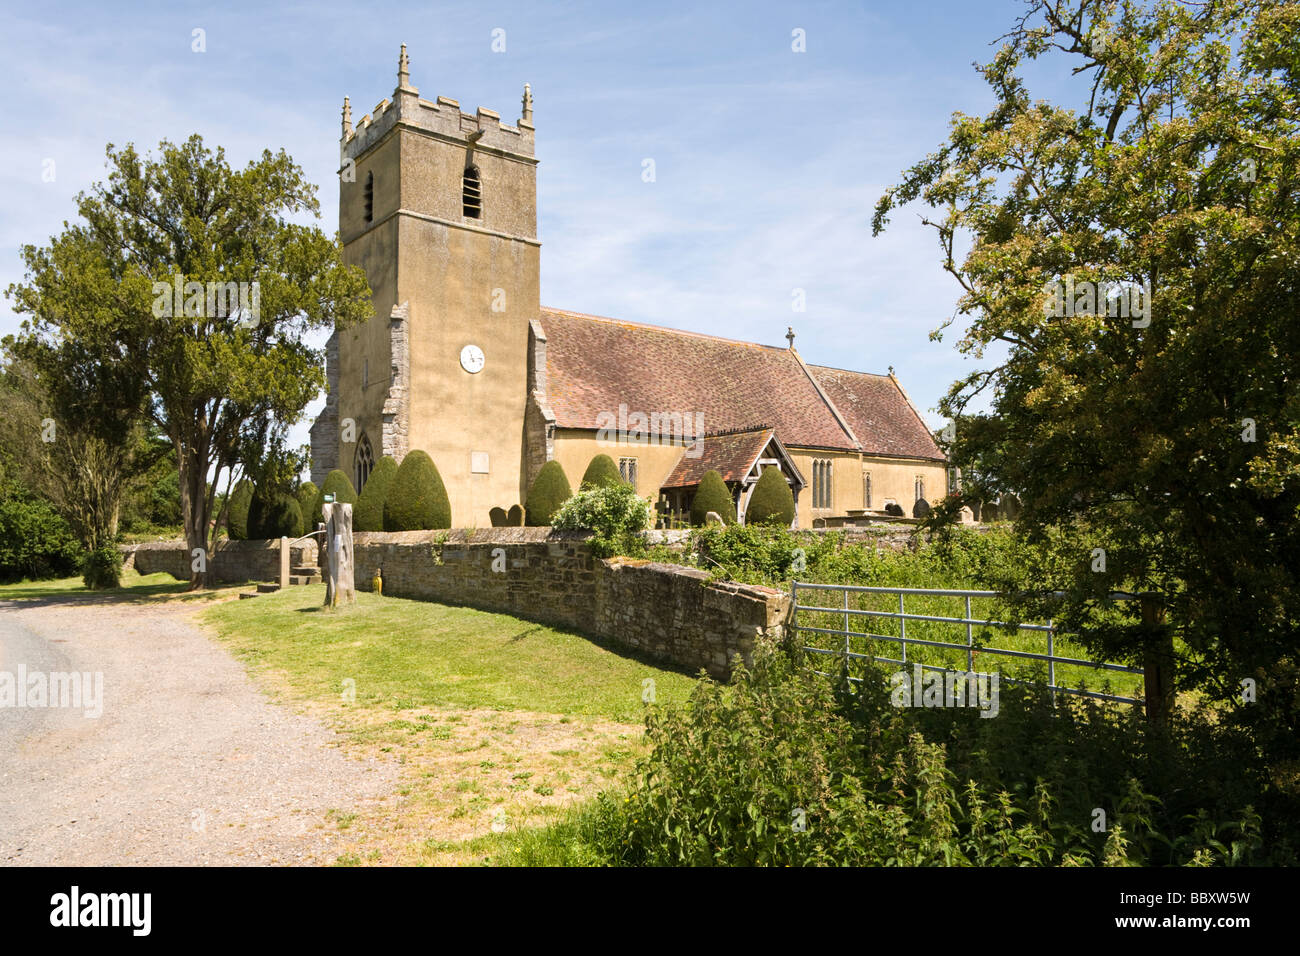 St Michael All Angels church, Tirley, Gloucestershire UK Stock Photo